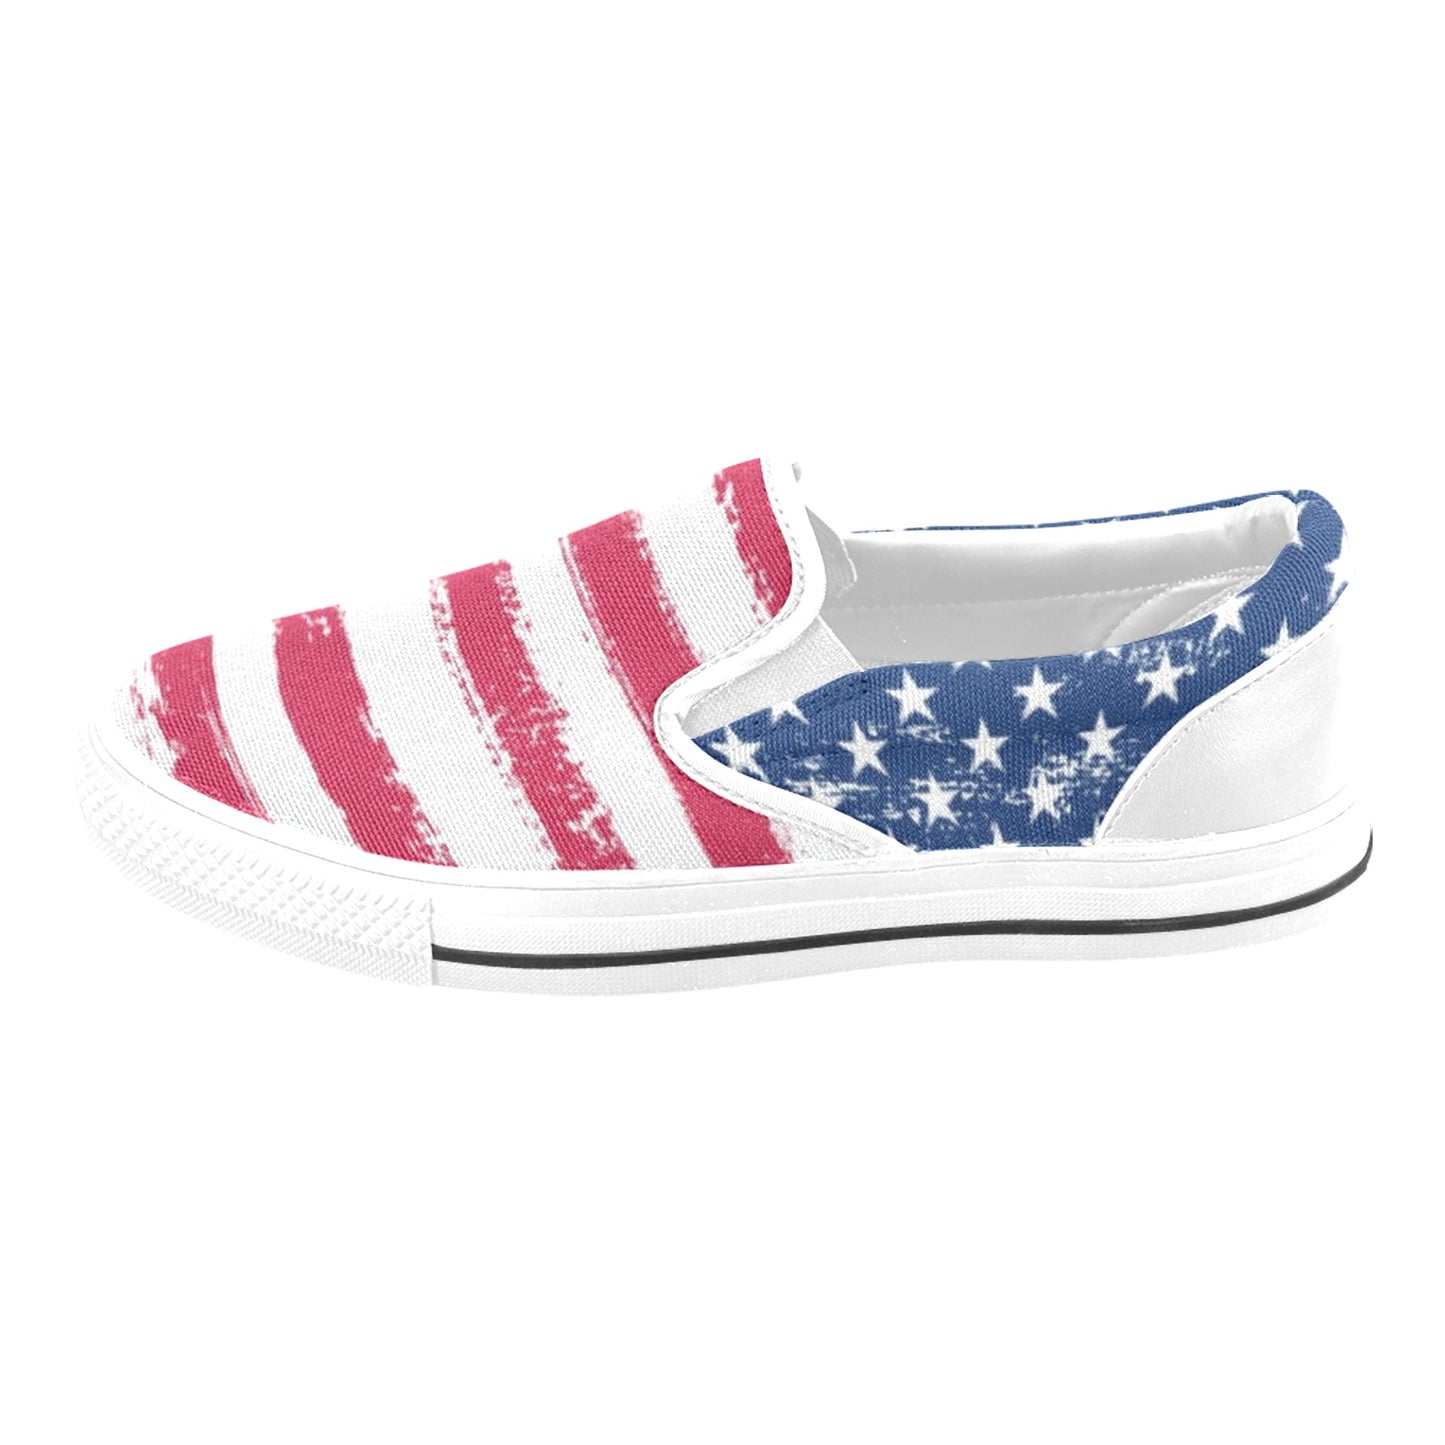 American Flag Women Shoes, Patriotic Red White Blue Mismatched Sneakers Stars and Stripes USA 4th of July Slip on Canvas Vegan Casual shoes Starcove Fashion